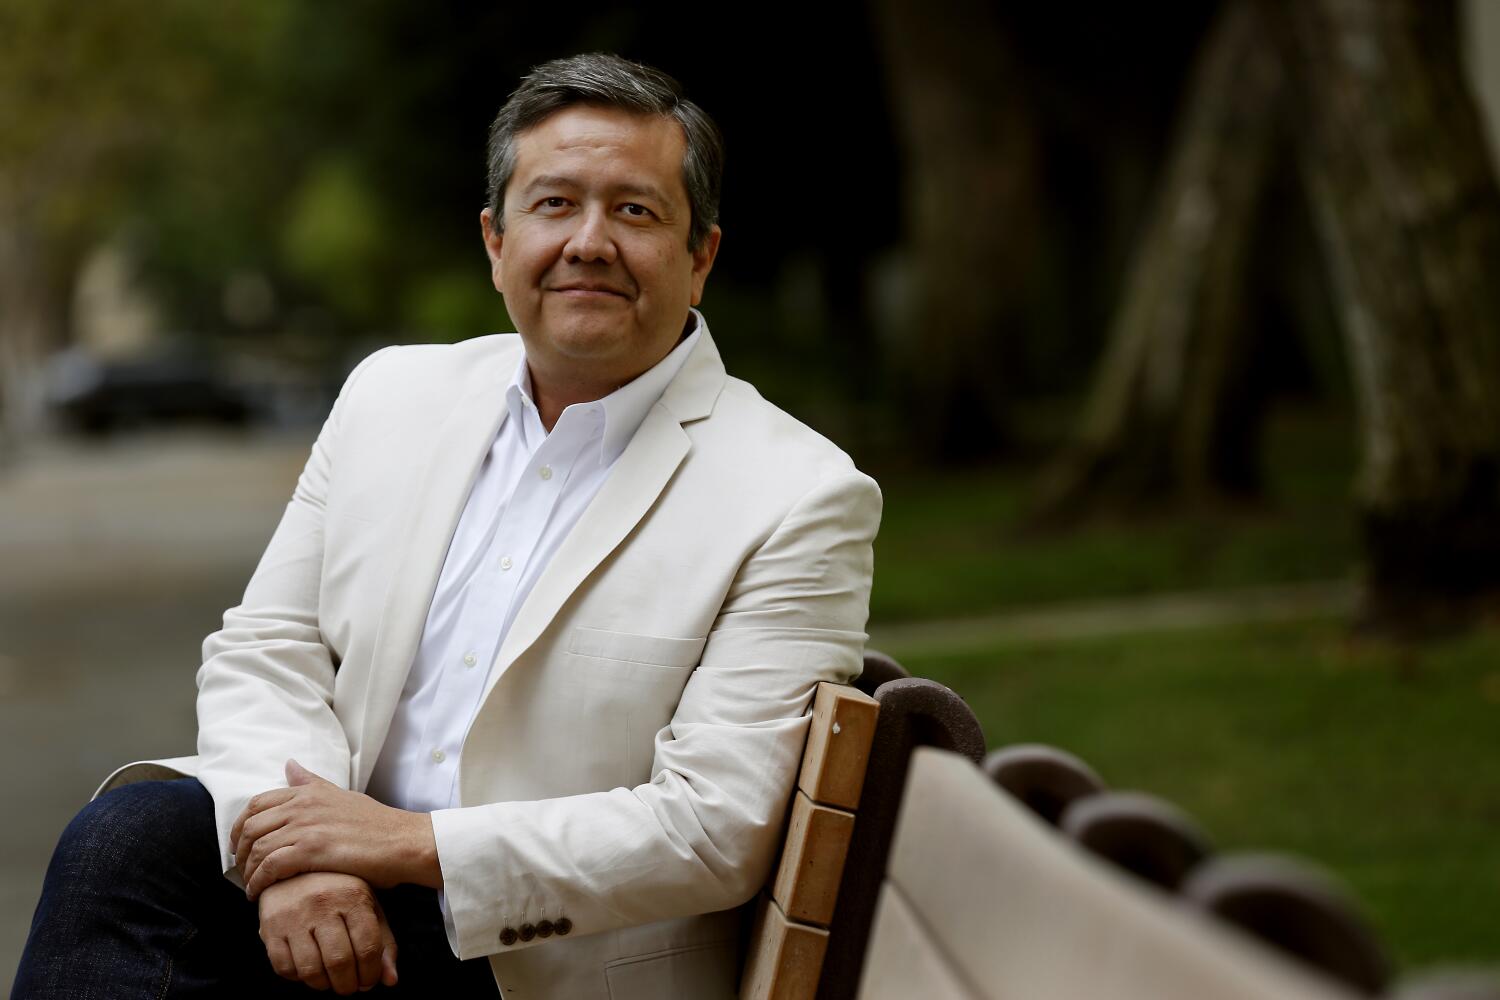 Miguel Santana to head California Community Foundation after Antonia Hernández's retirement